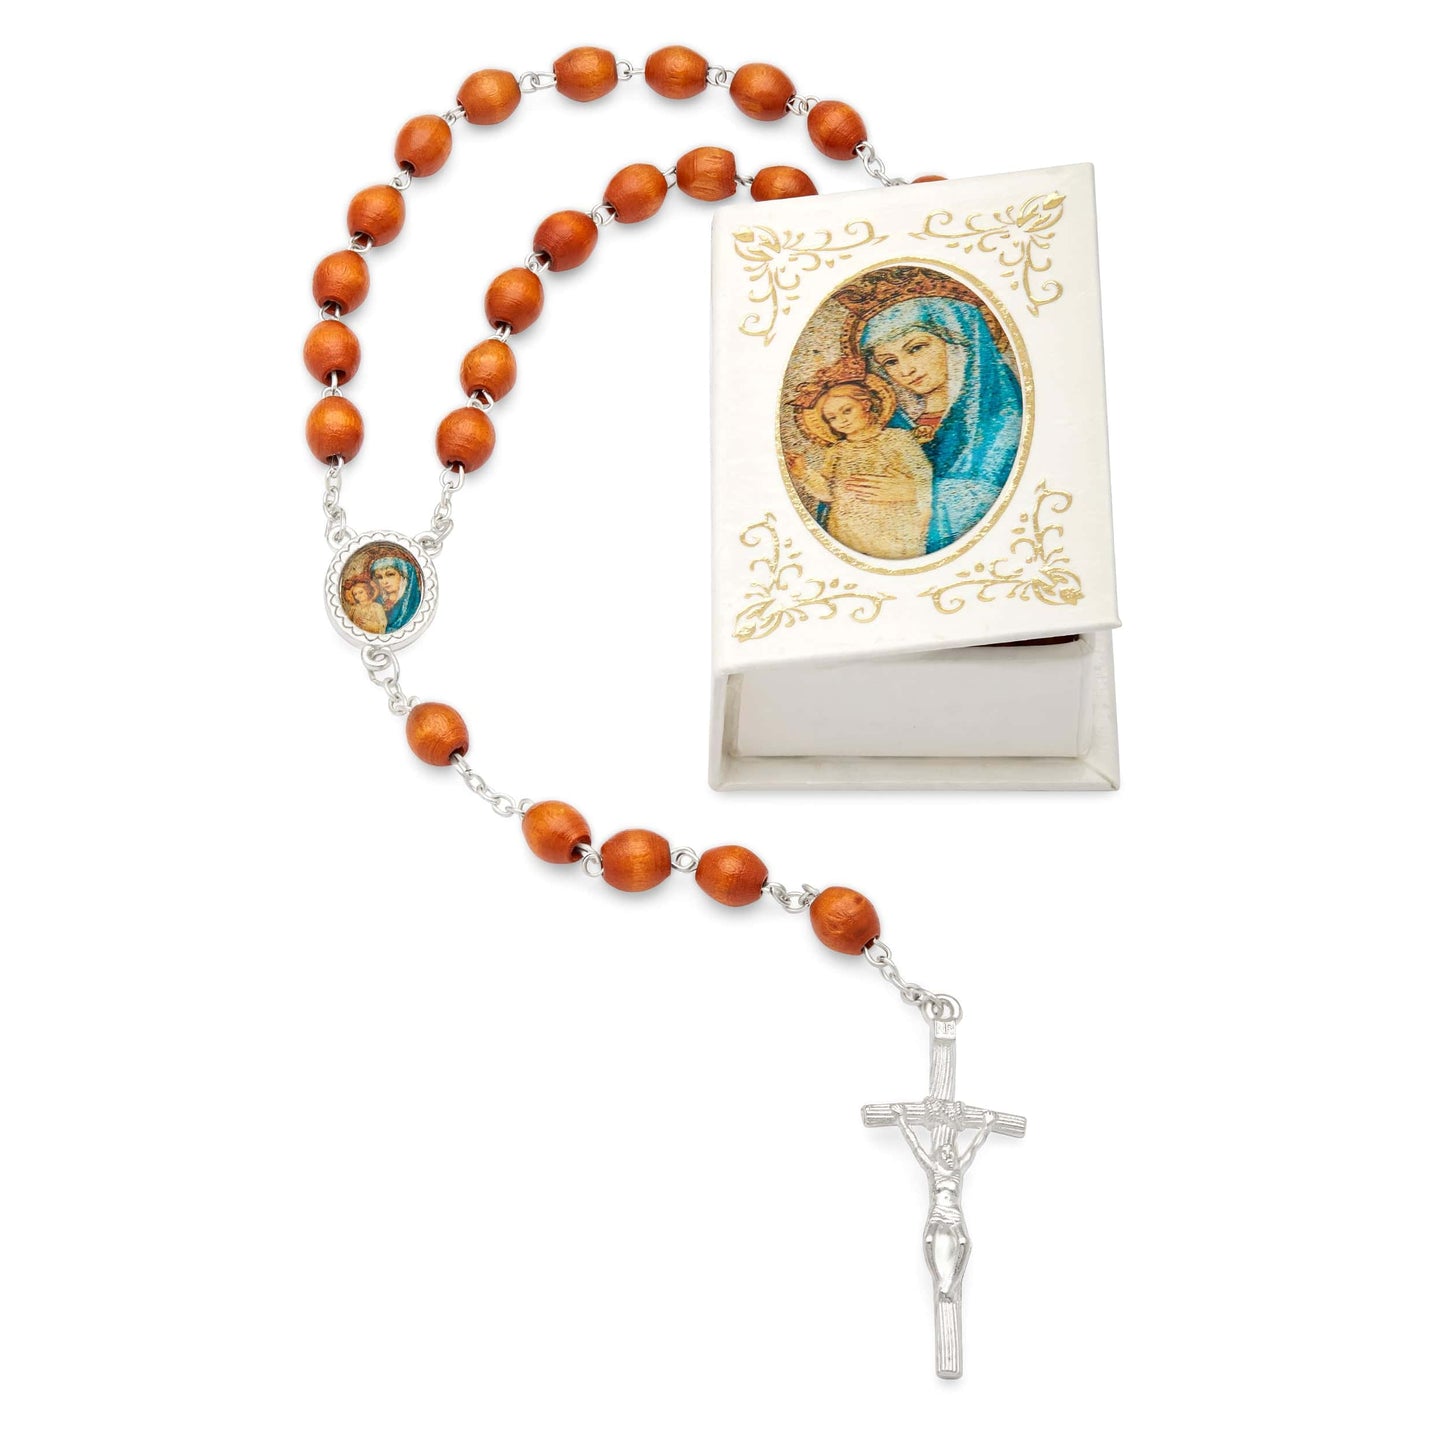 MONDO CATTOLICO Prayer Beads 53 cm (20.90 in) / 7 mm (0.30 in) White Box and Rosary with Mater Ecclesiae Virgin